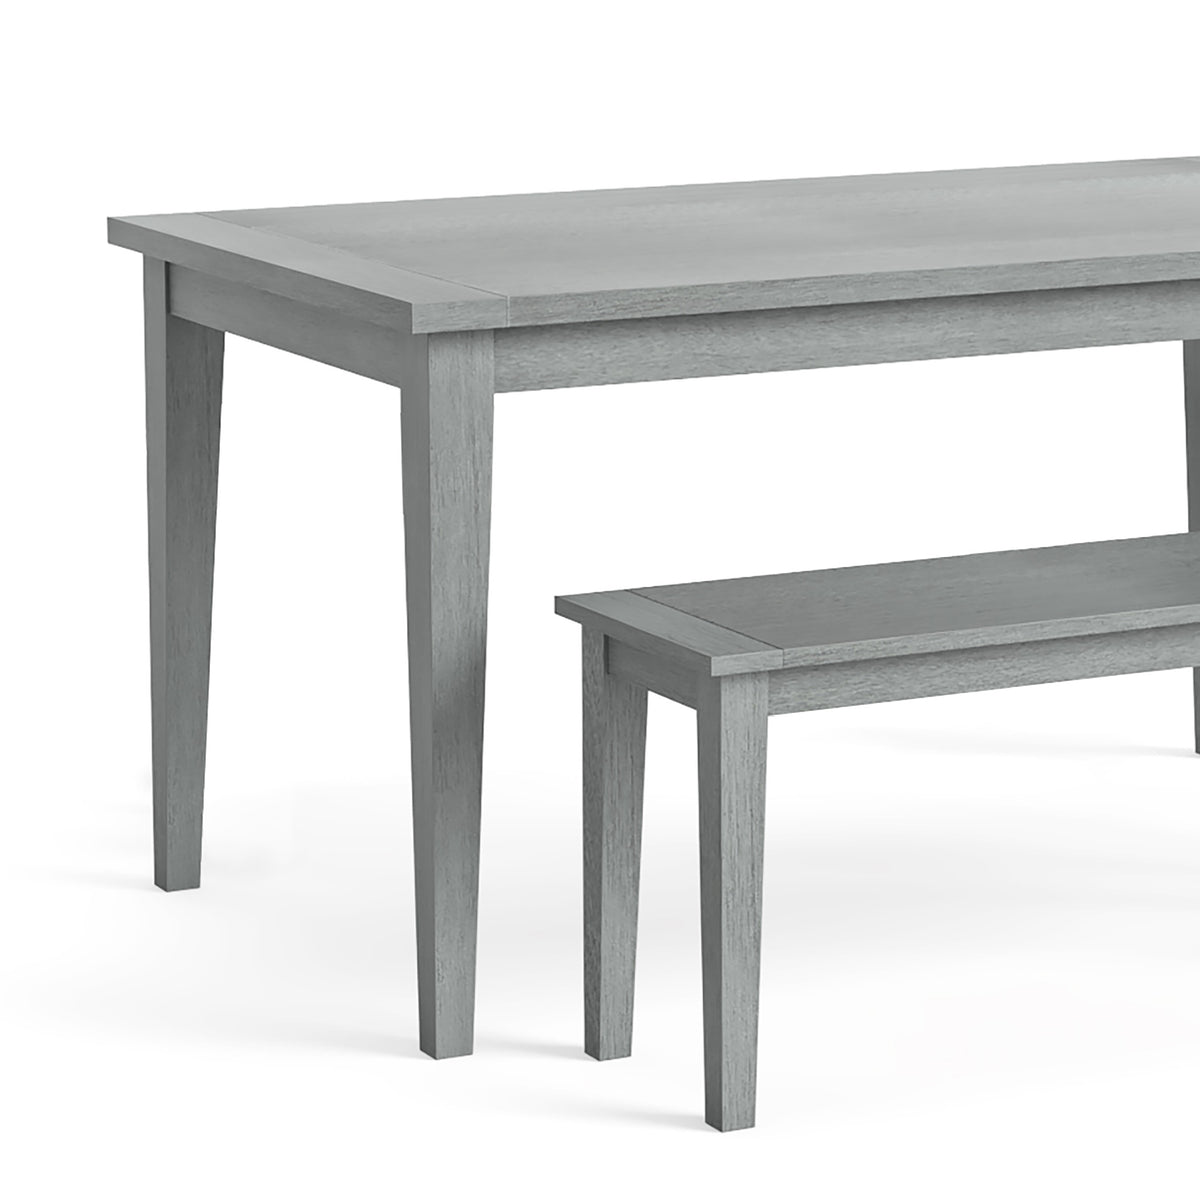 Elise Gris Grey Acacia Dining Set with Benches close up of table top and legs